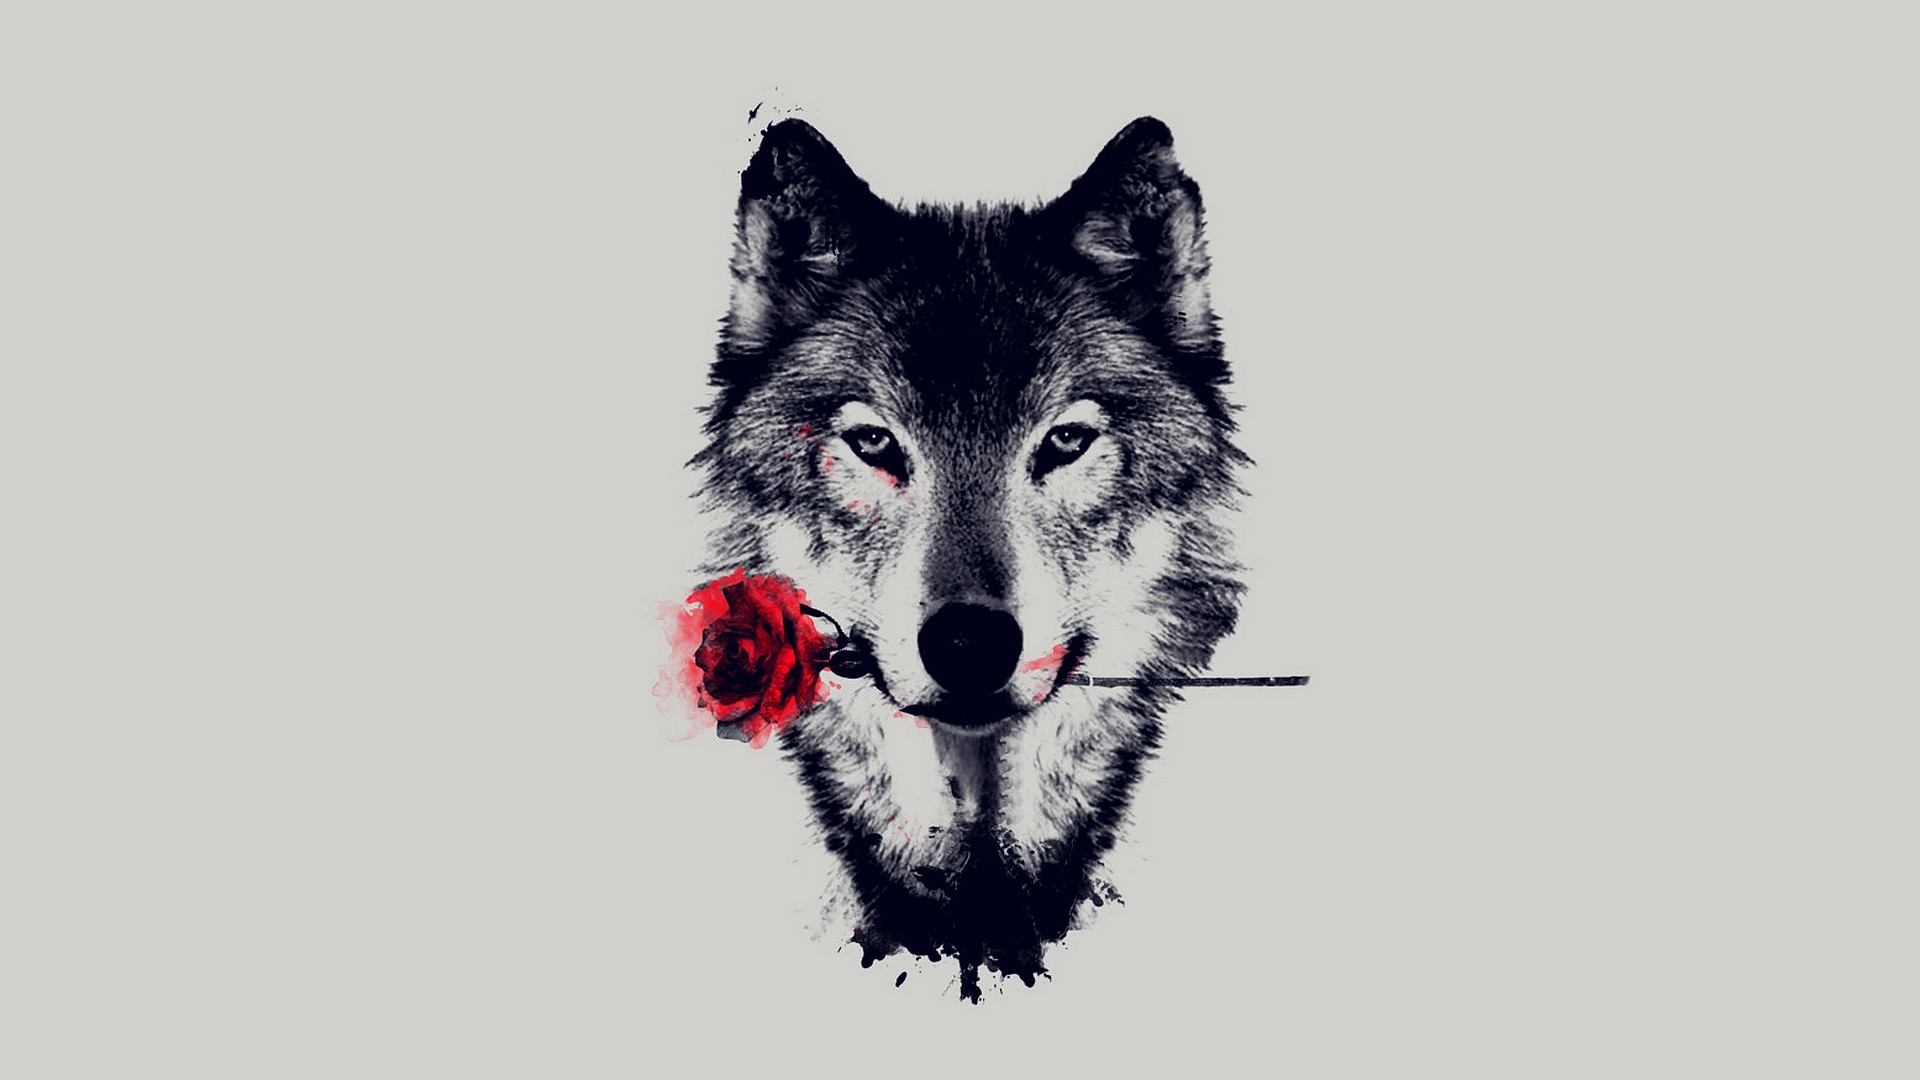 1920x1080 Wolf HD Wallpapers Backgrounds Wallpaper | HD Wallpapers | Pinterest | Wolf  wallpaper, Wallpaper and Wallpapers android